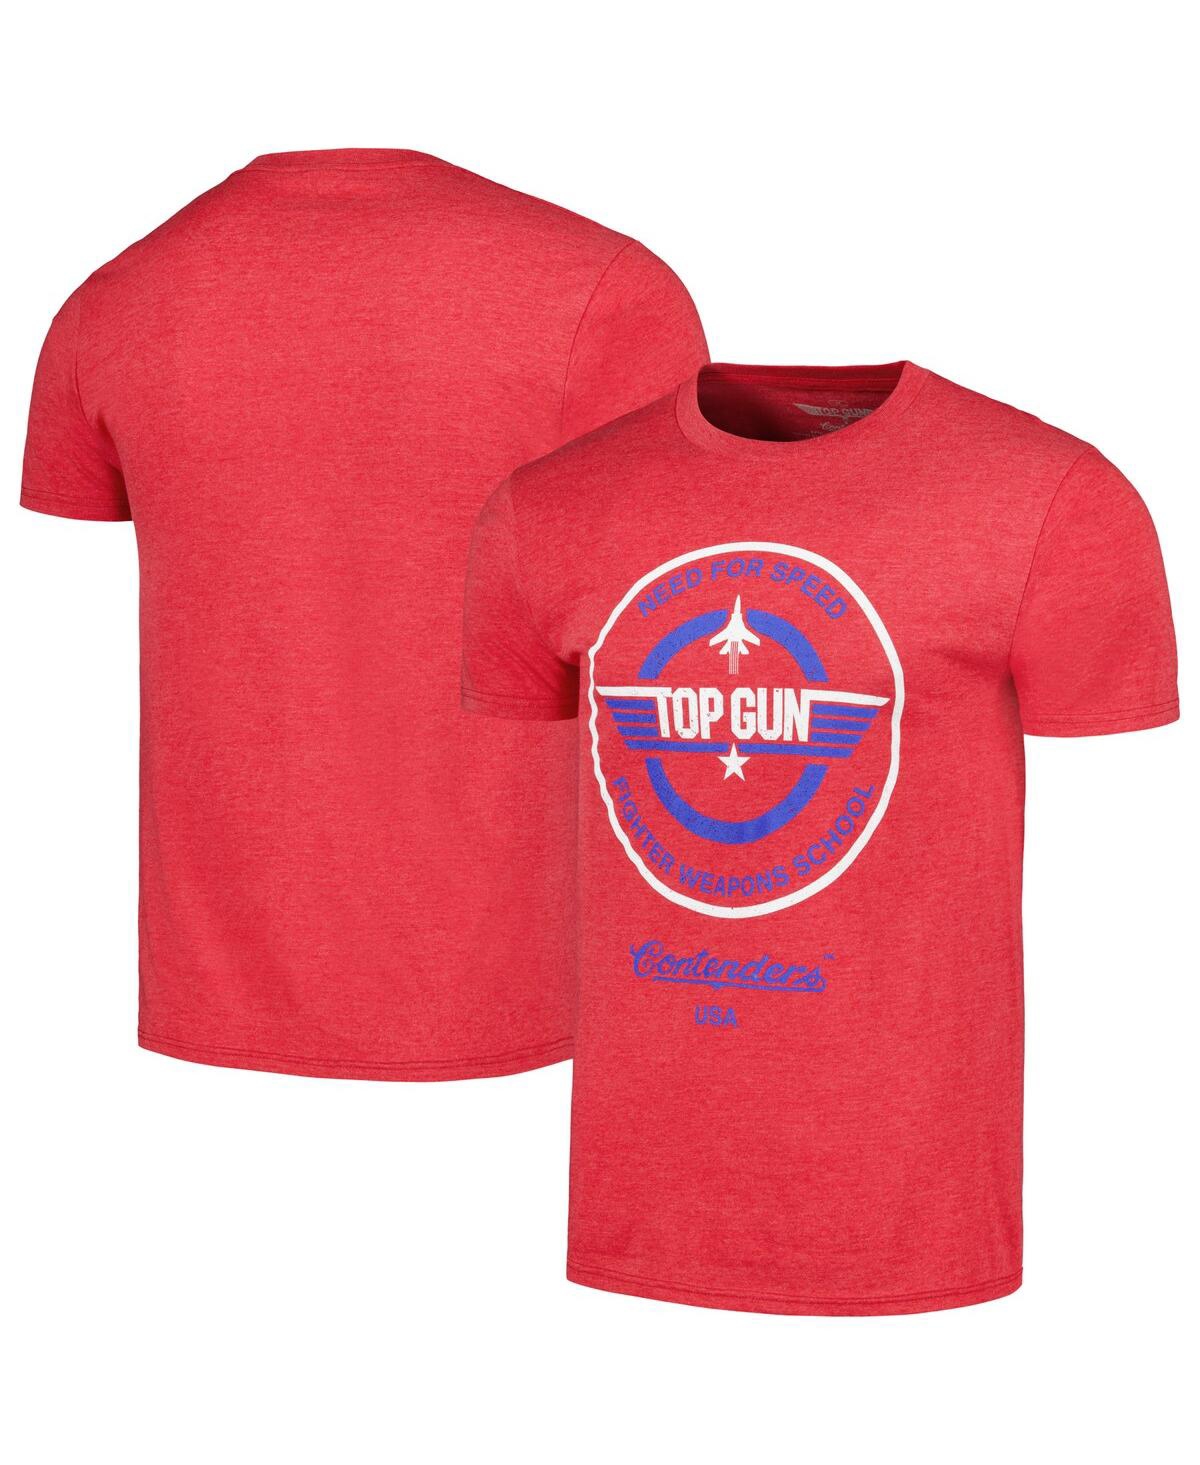 Men's Contenders Clothing Heather Red Top Gun Crest T-shirt - Heather Red